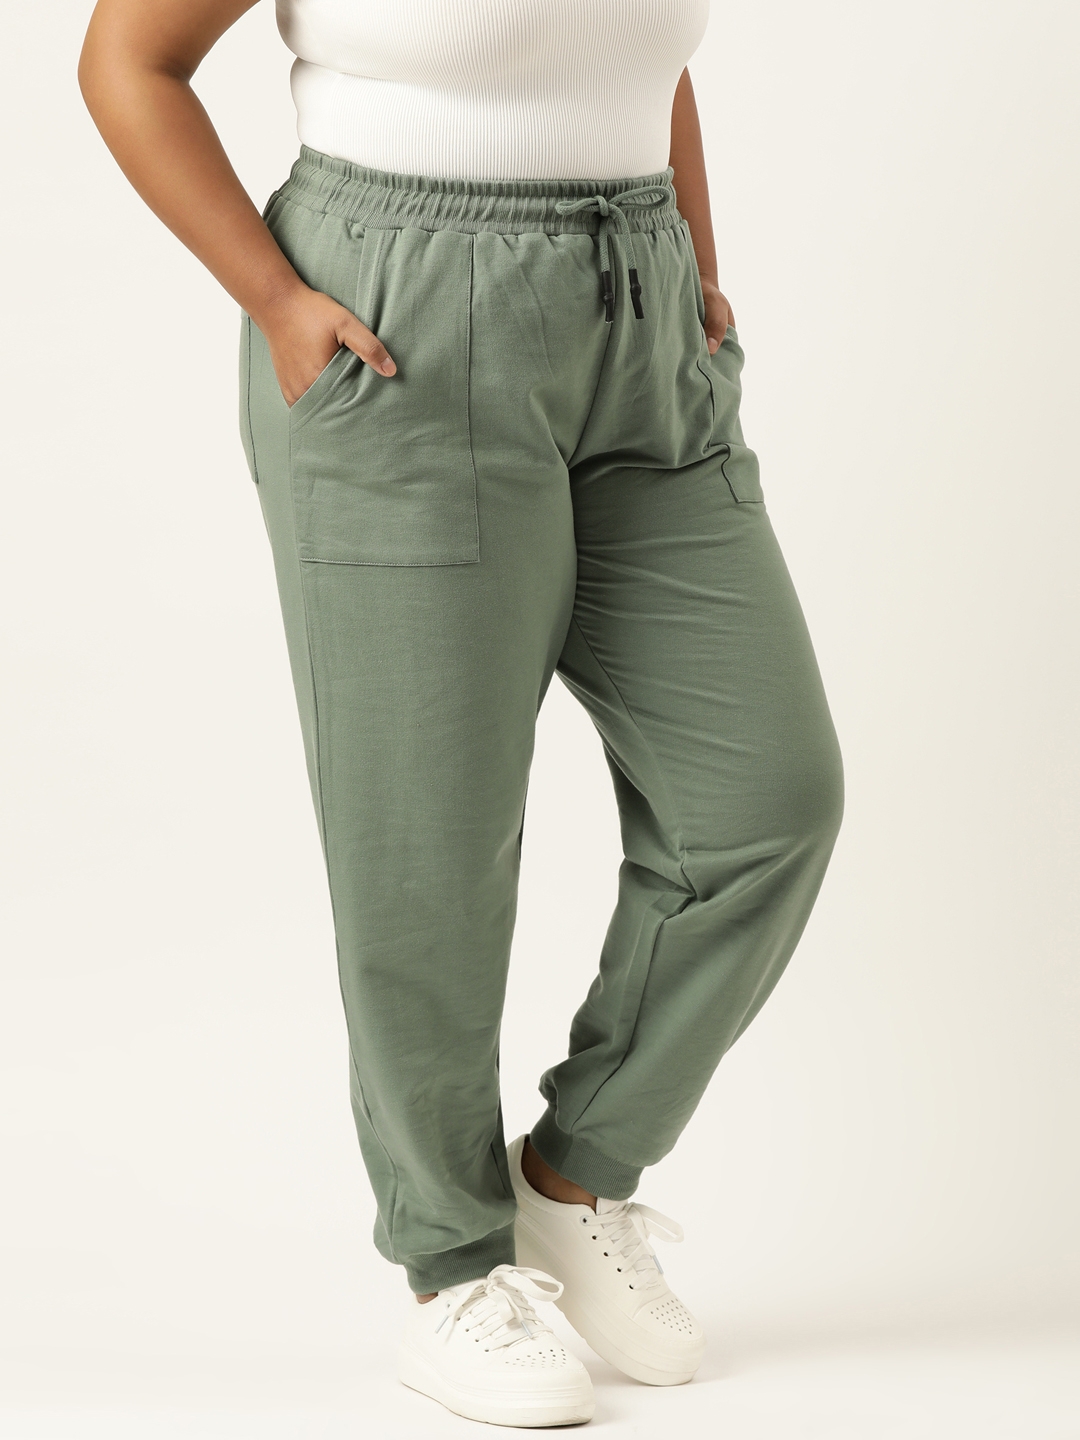 Plus Size Green Cotton Jogger With Cuff For Women